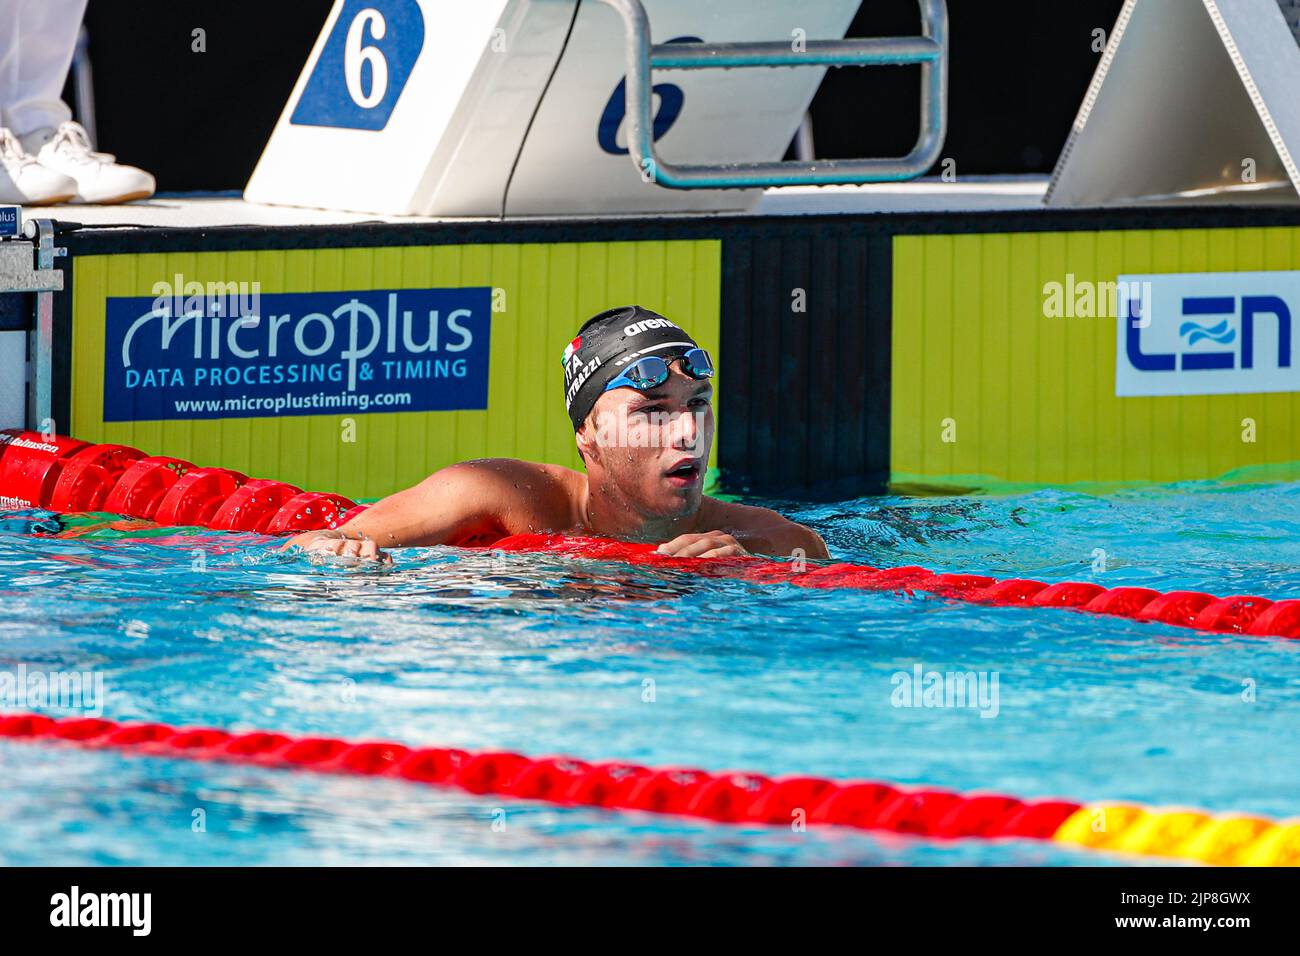 ROME, ITALY - AUGUST 16: Pier Andrea Matteazzi of Italy during the men's 200m individual medley at the European Aquatics Roma 2022 at Stadio del Nuoto on August 16, 2022 in Rome, Italy (Photo by Nikola Krstic/Orange Pictures) Stock Photo